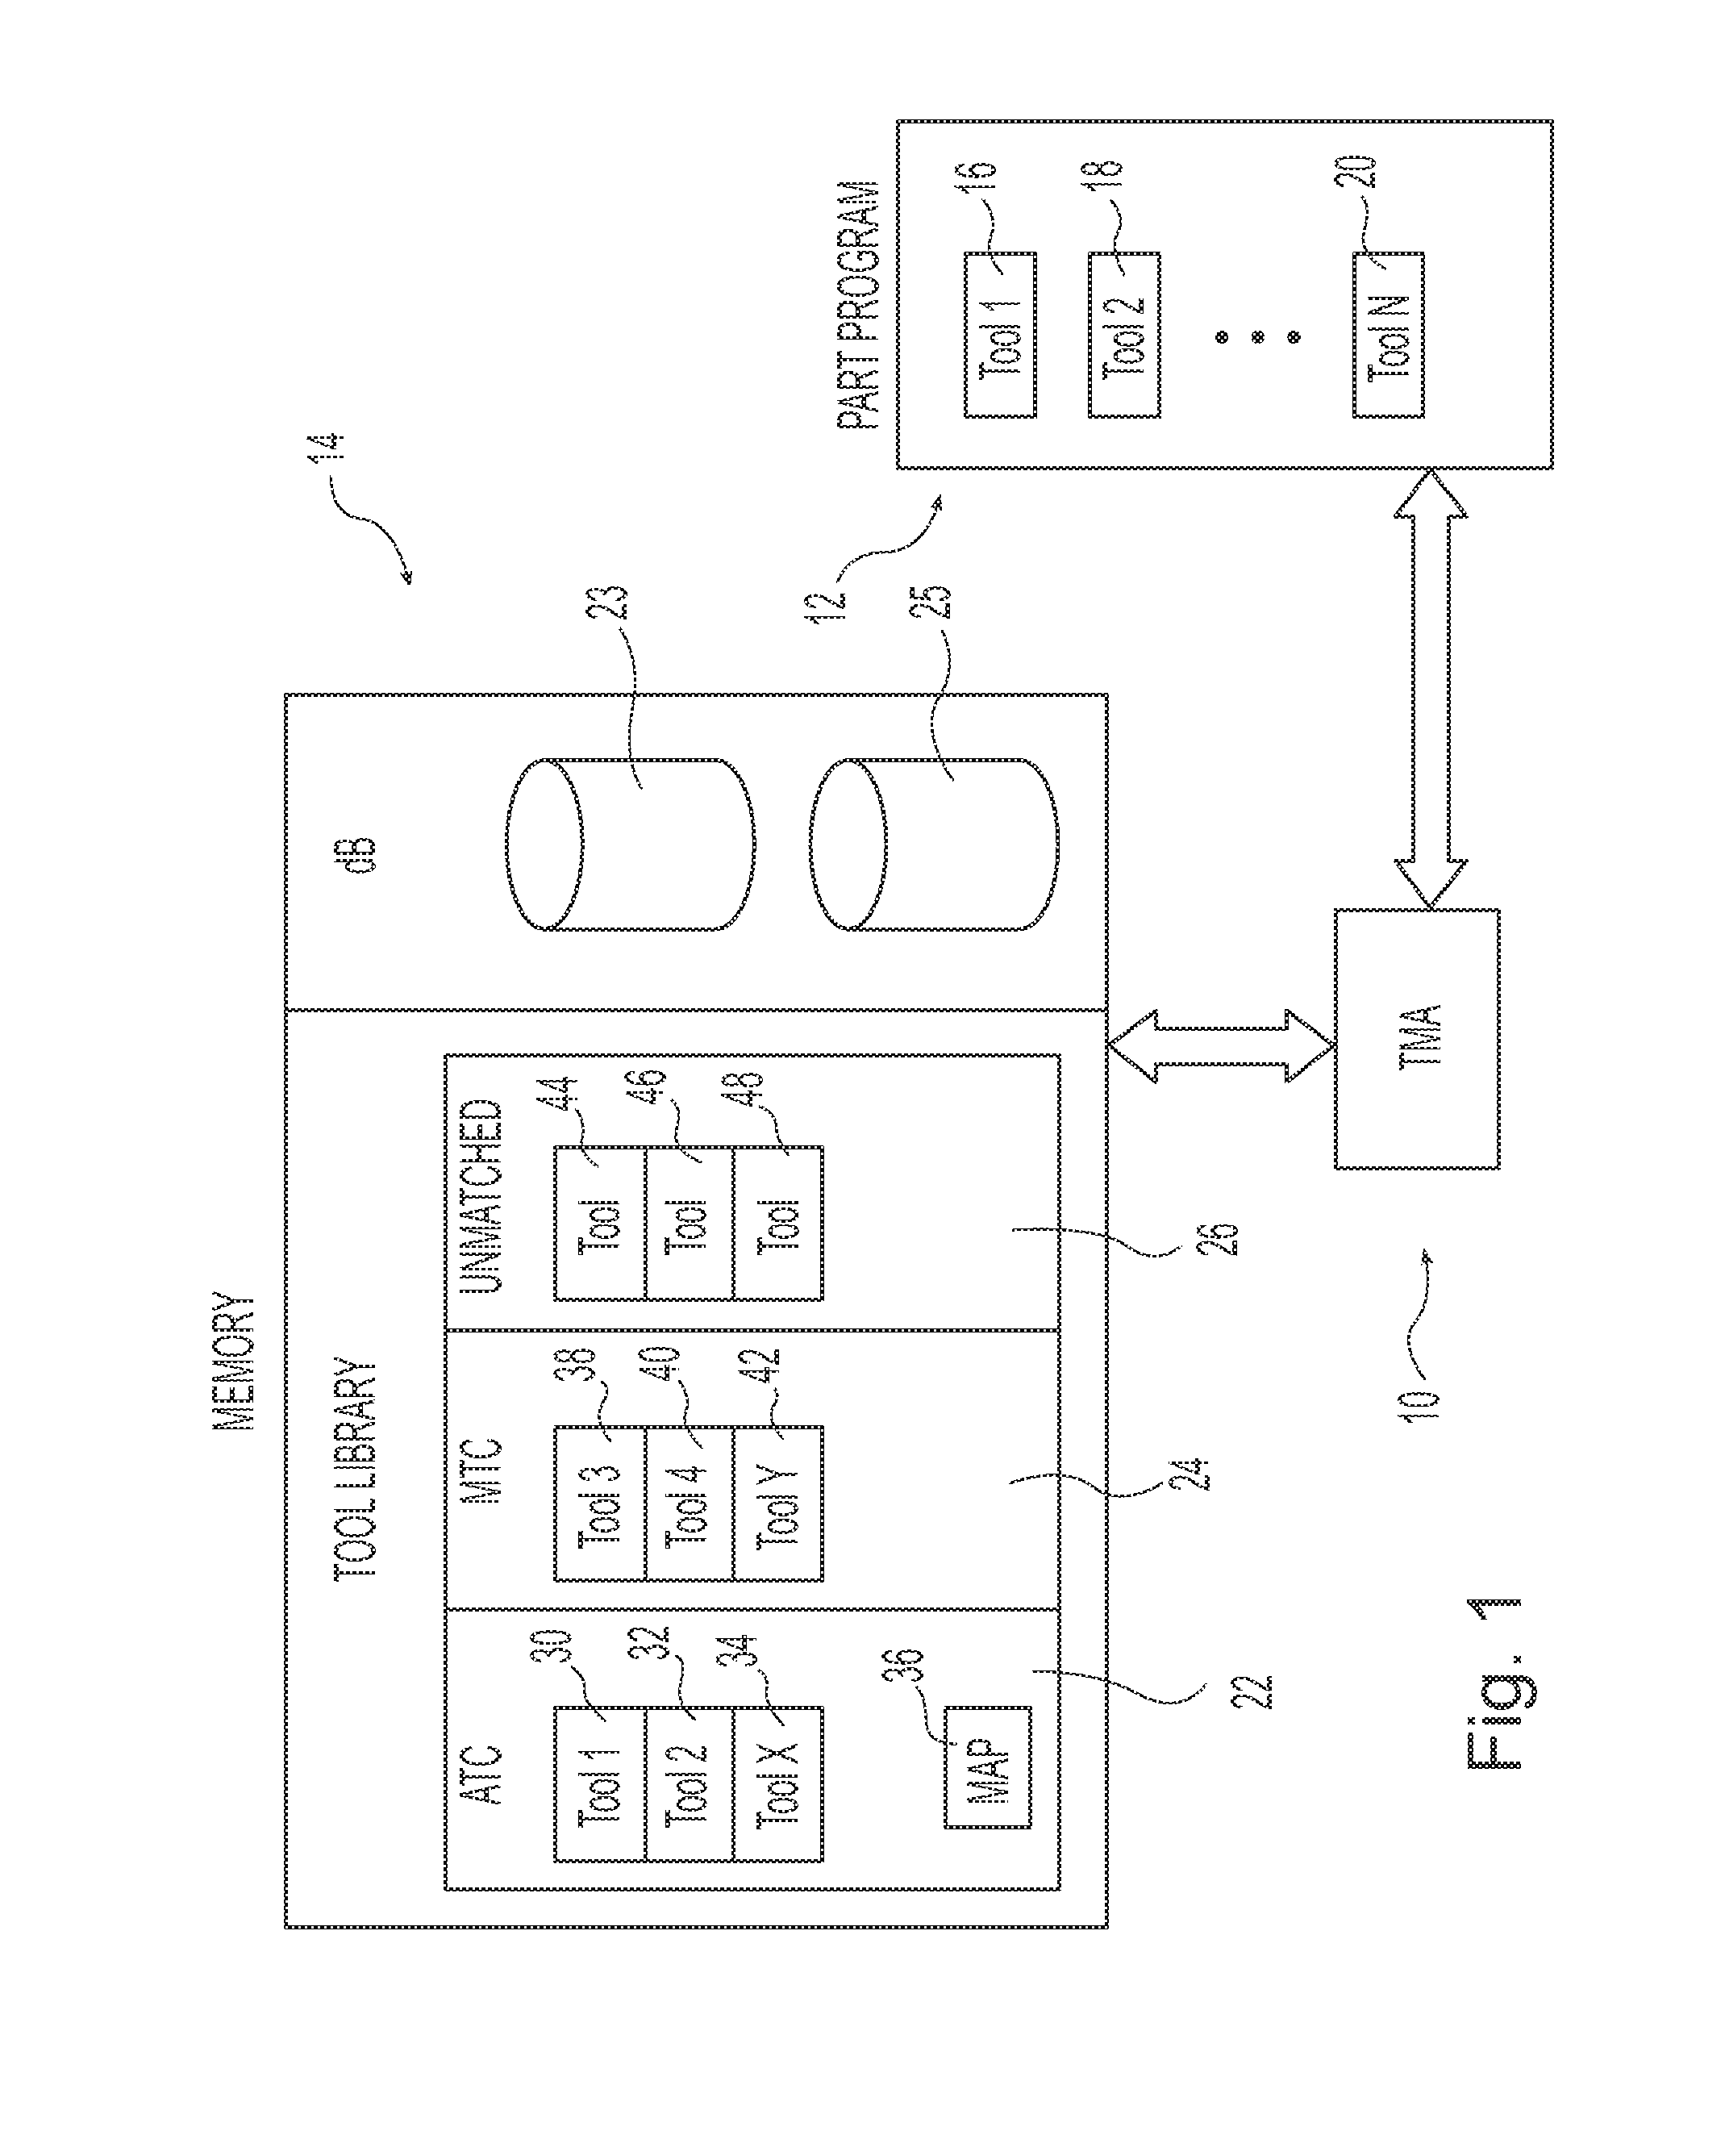 System and method for tool use management